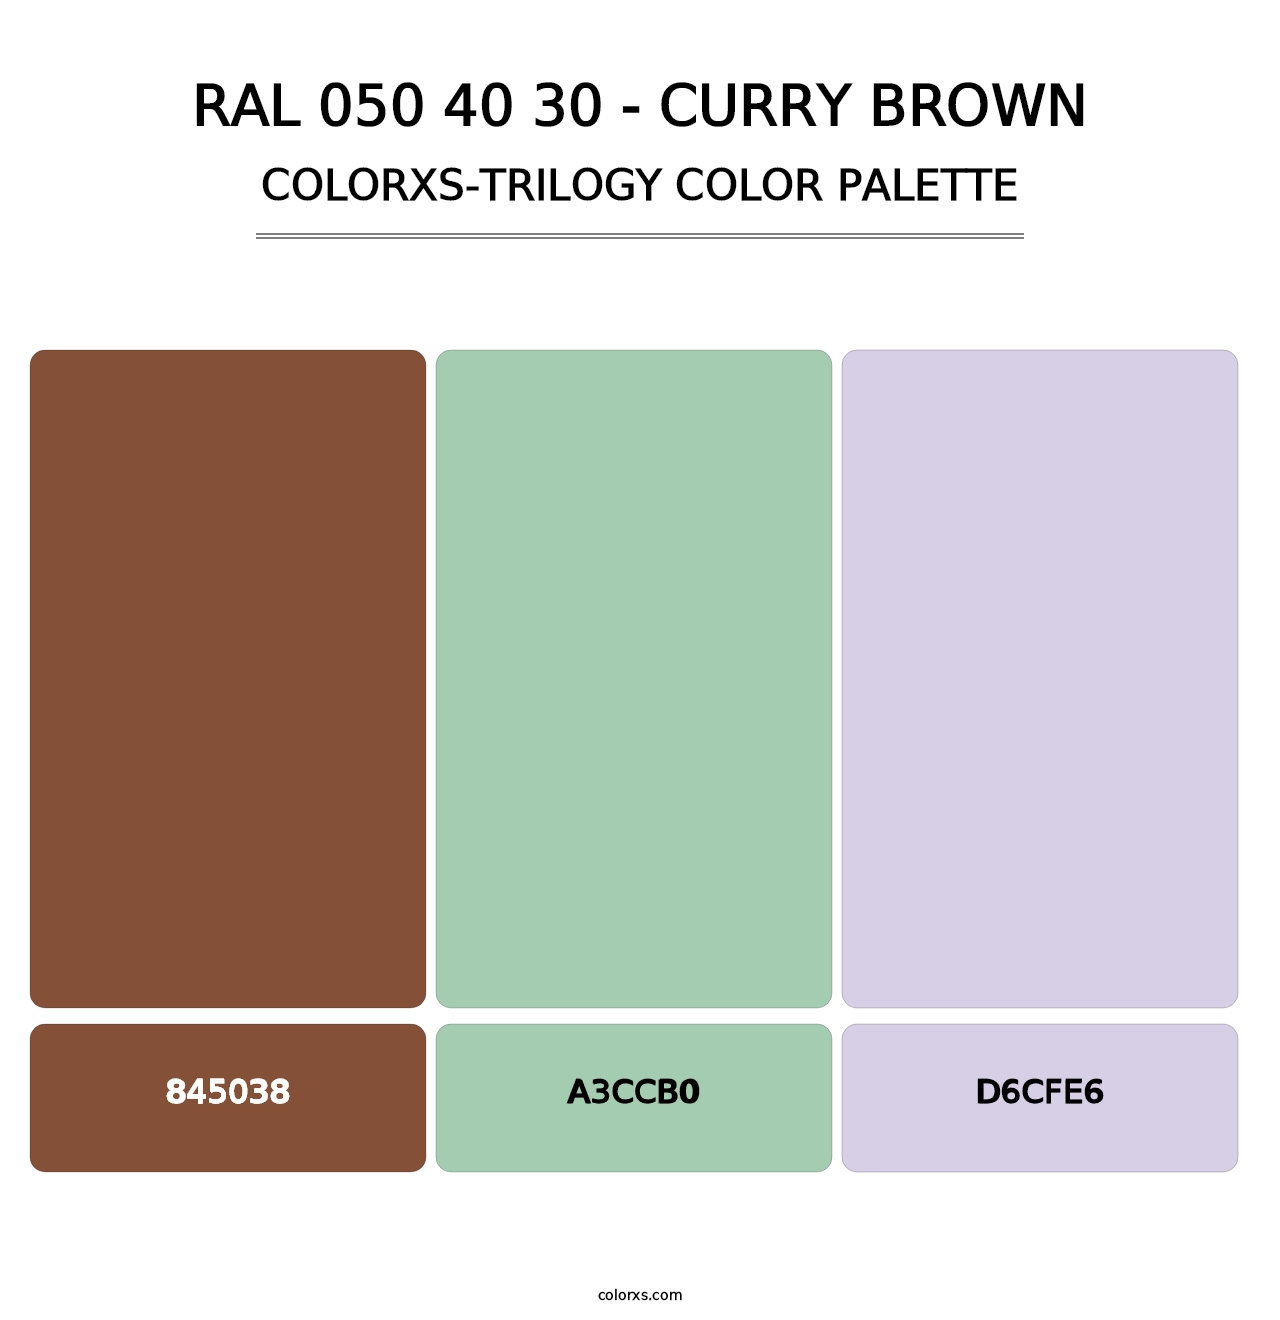 RAL 050 40 30 - Curry Brown - Colorxs Trilogy Palette